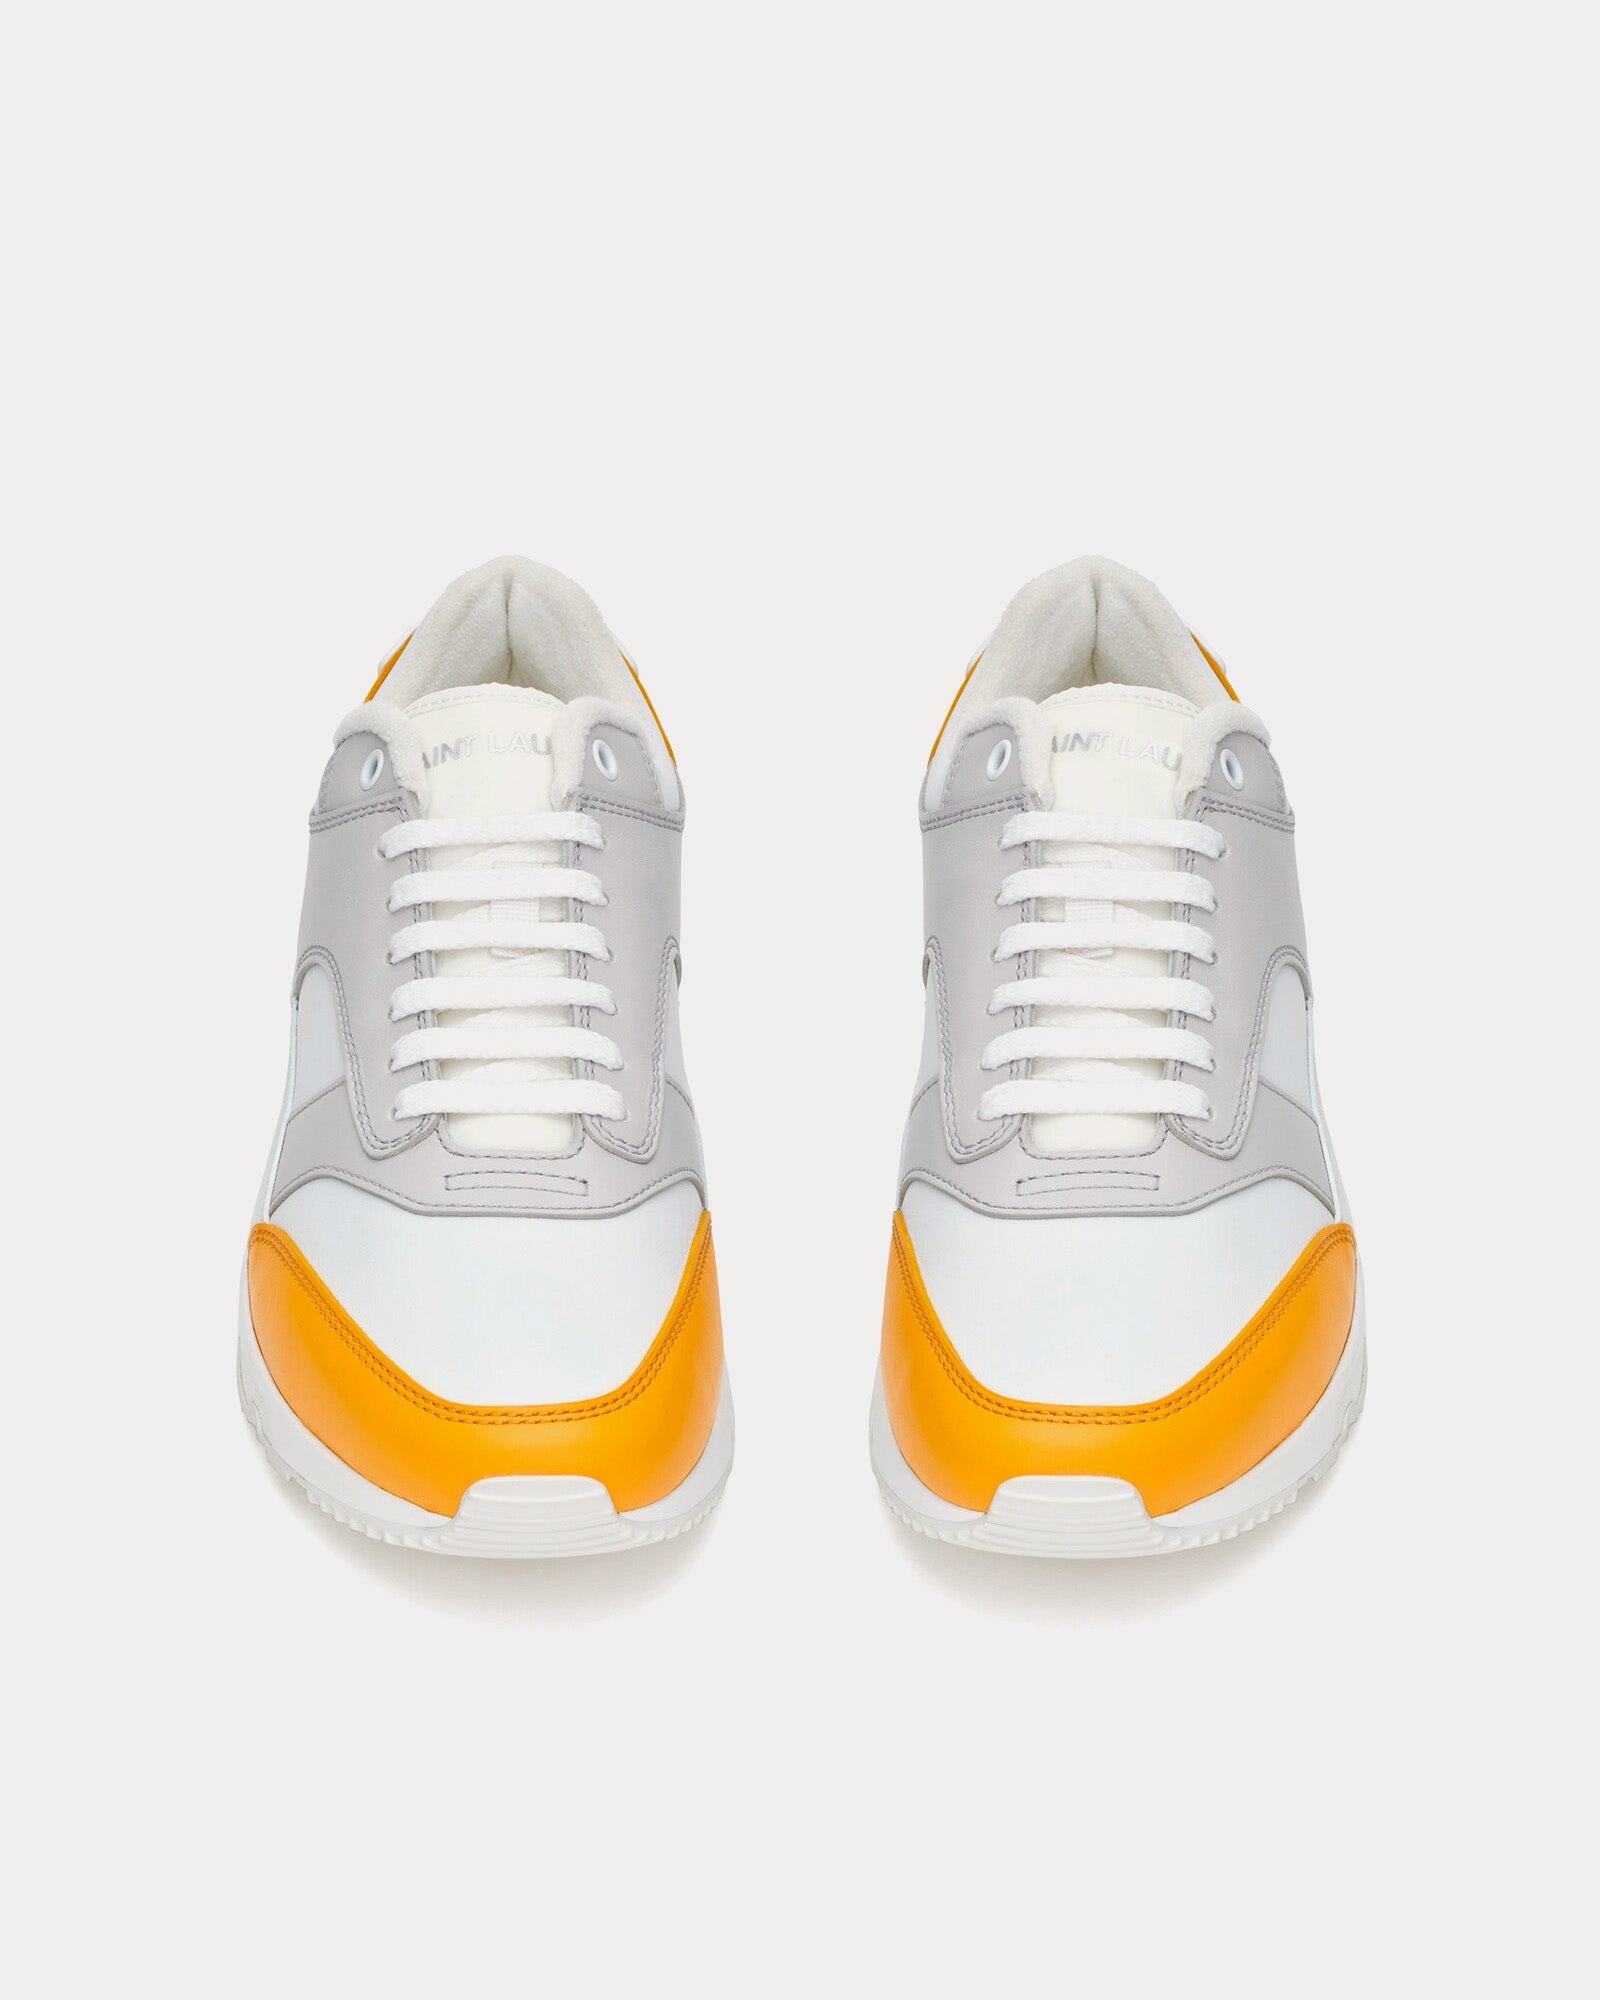 Saint Laurent - Bump Smooth Leather White / Yellow Low Top Sneakers